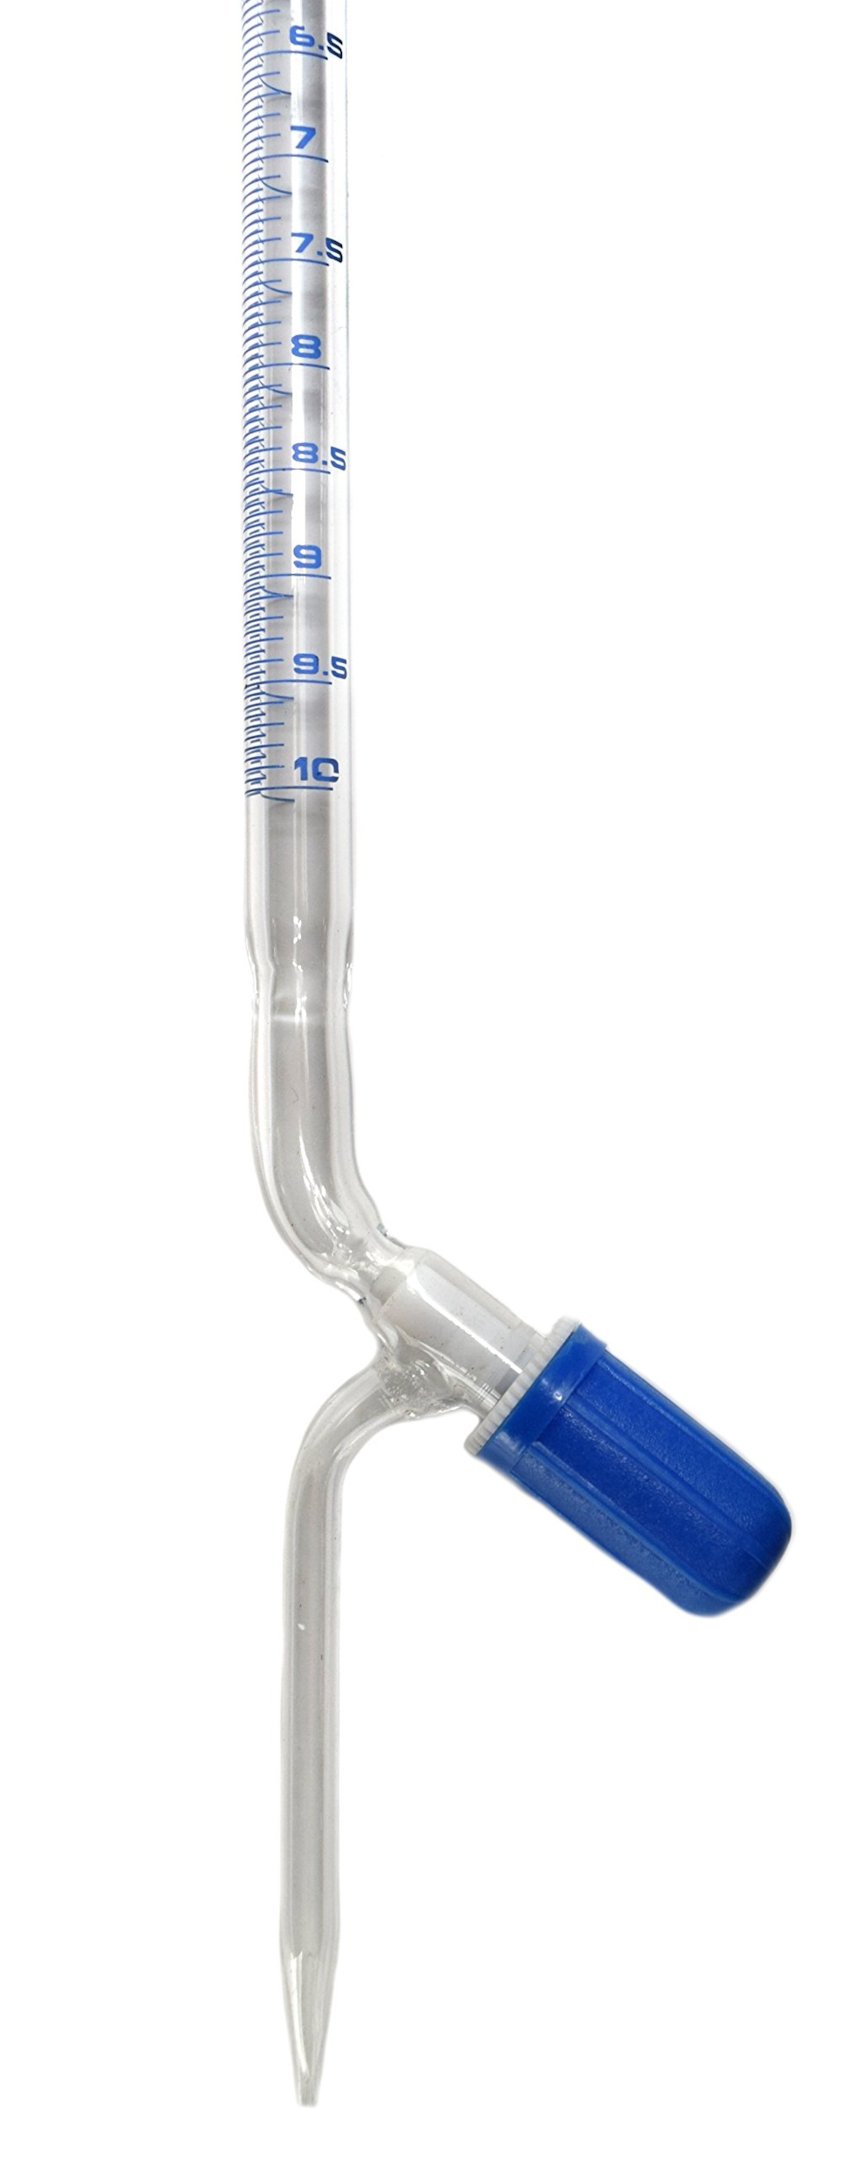 A buret clamp holding a long glass tube with a stopcock valve at the end